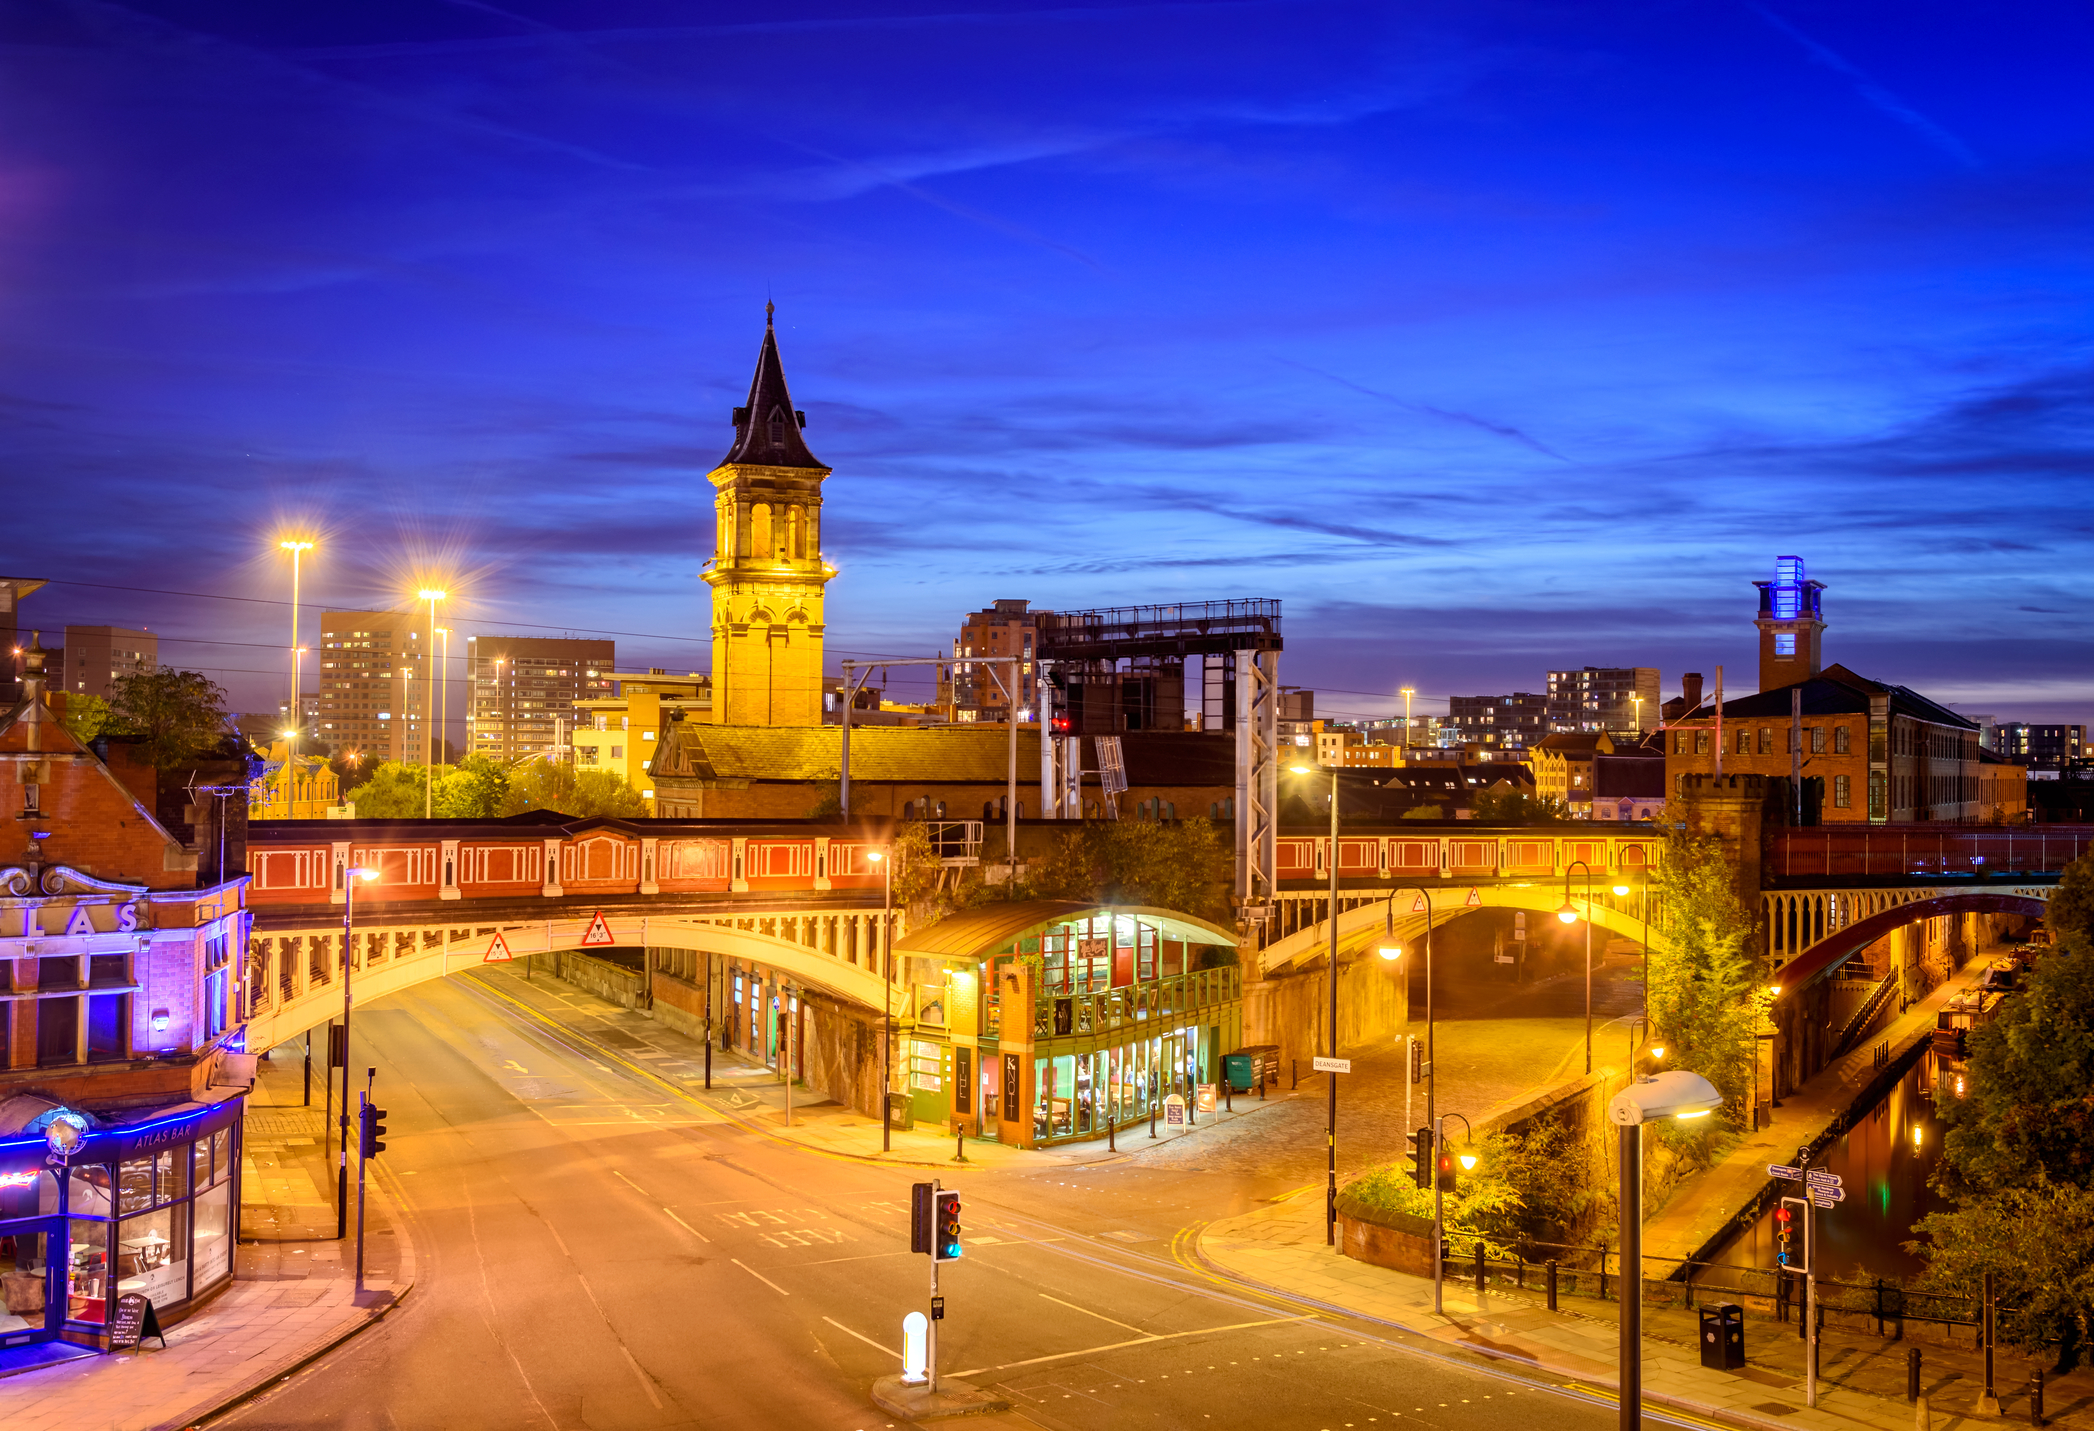 Flights from $417 to Manchester, England round-trip